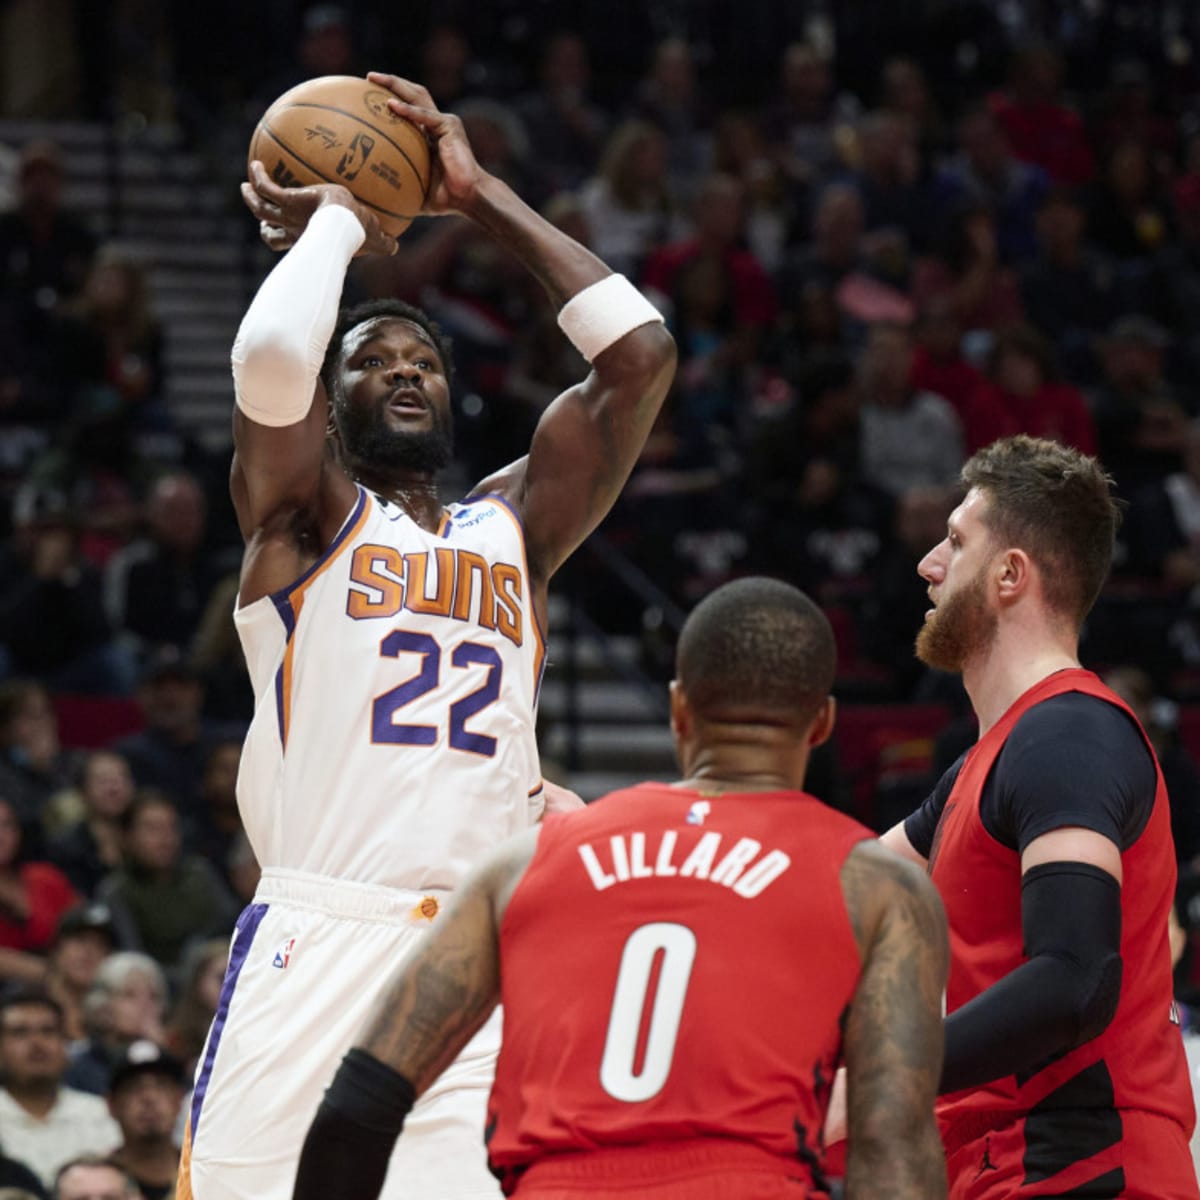 Why was Suns' Deandre Ayton's dunk a legal NBA play? – The Denver Post